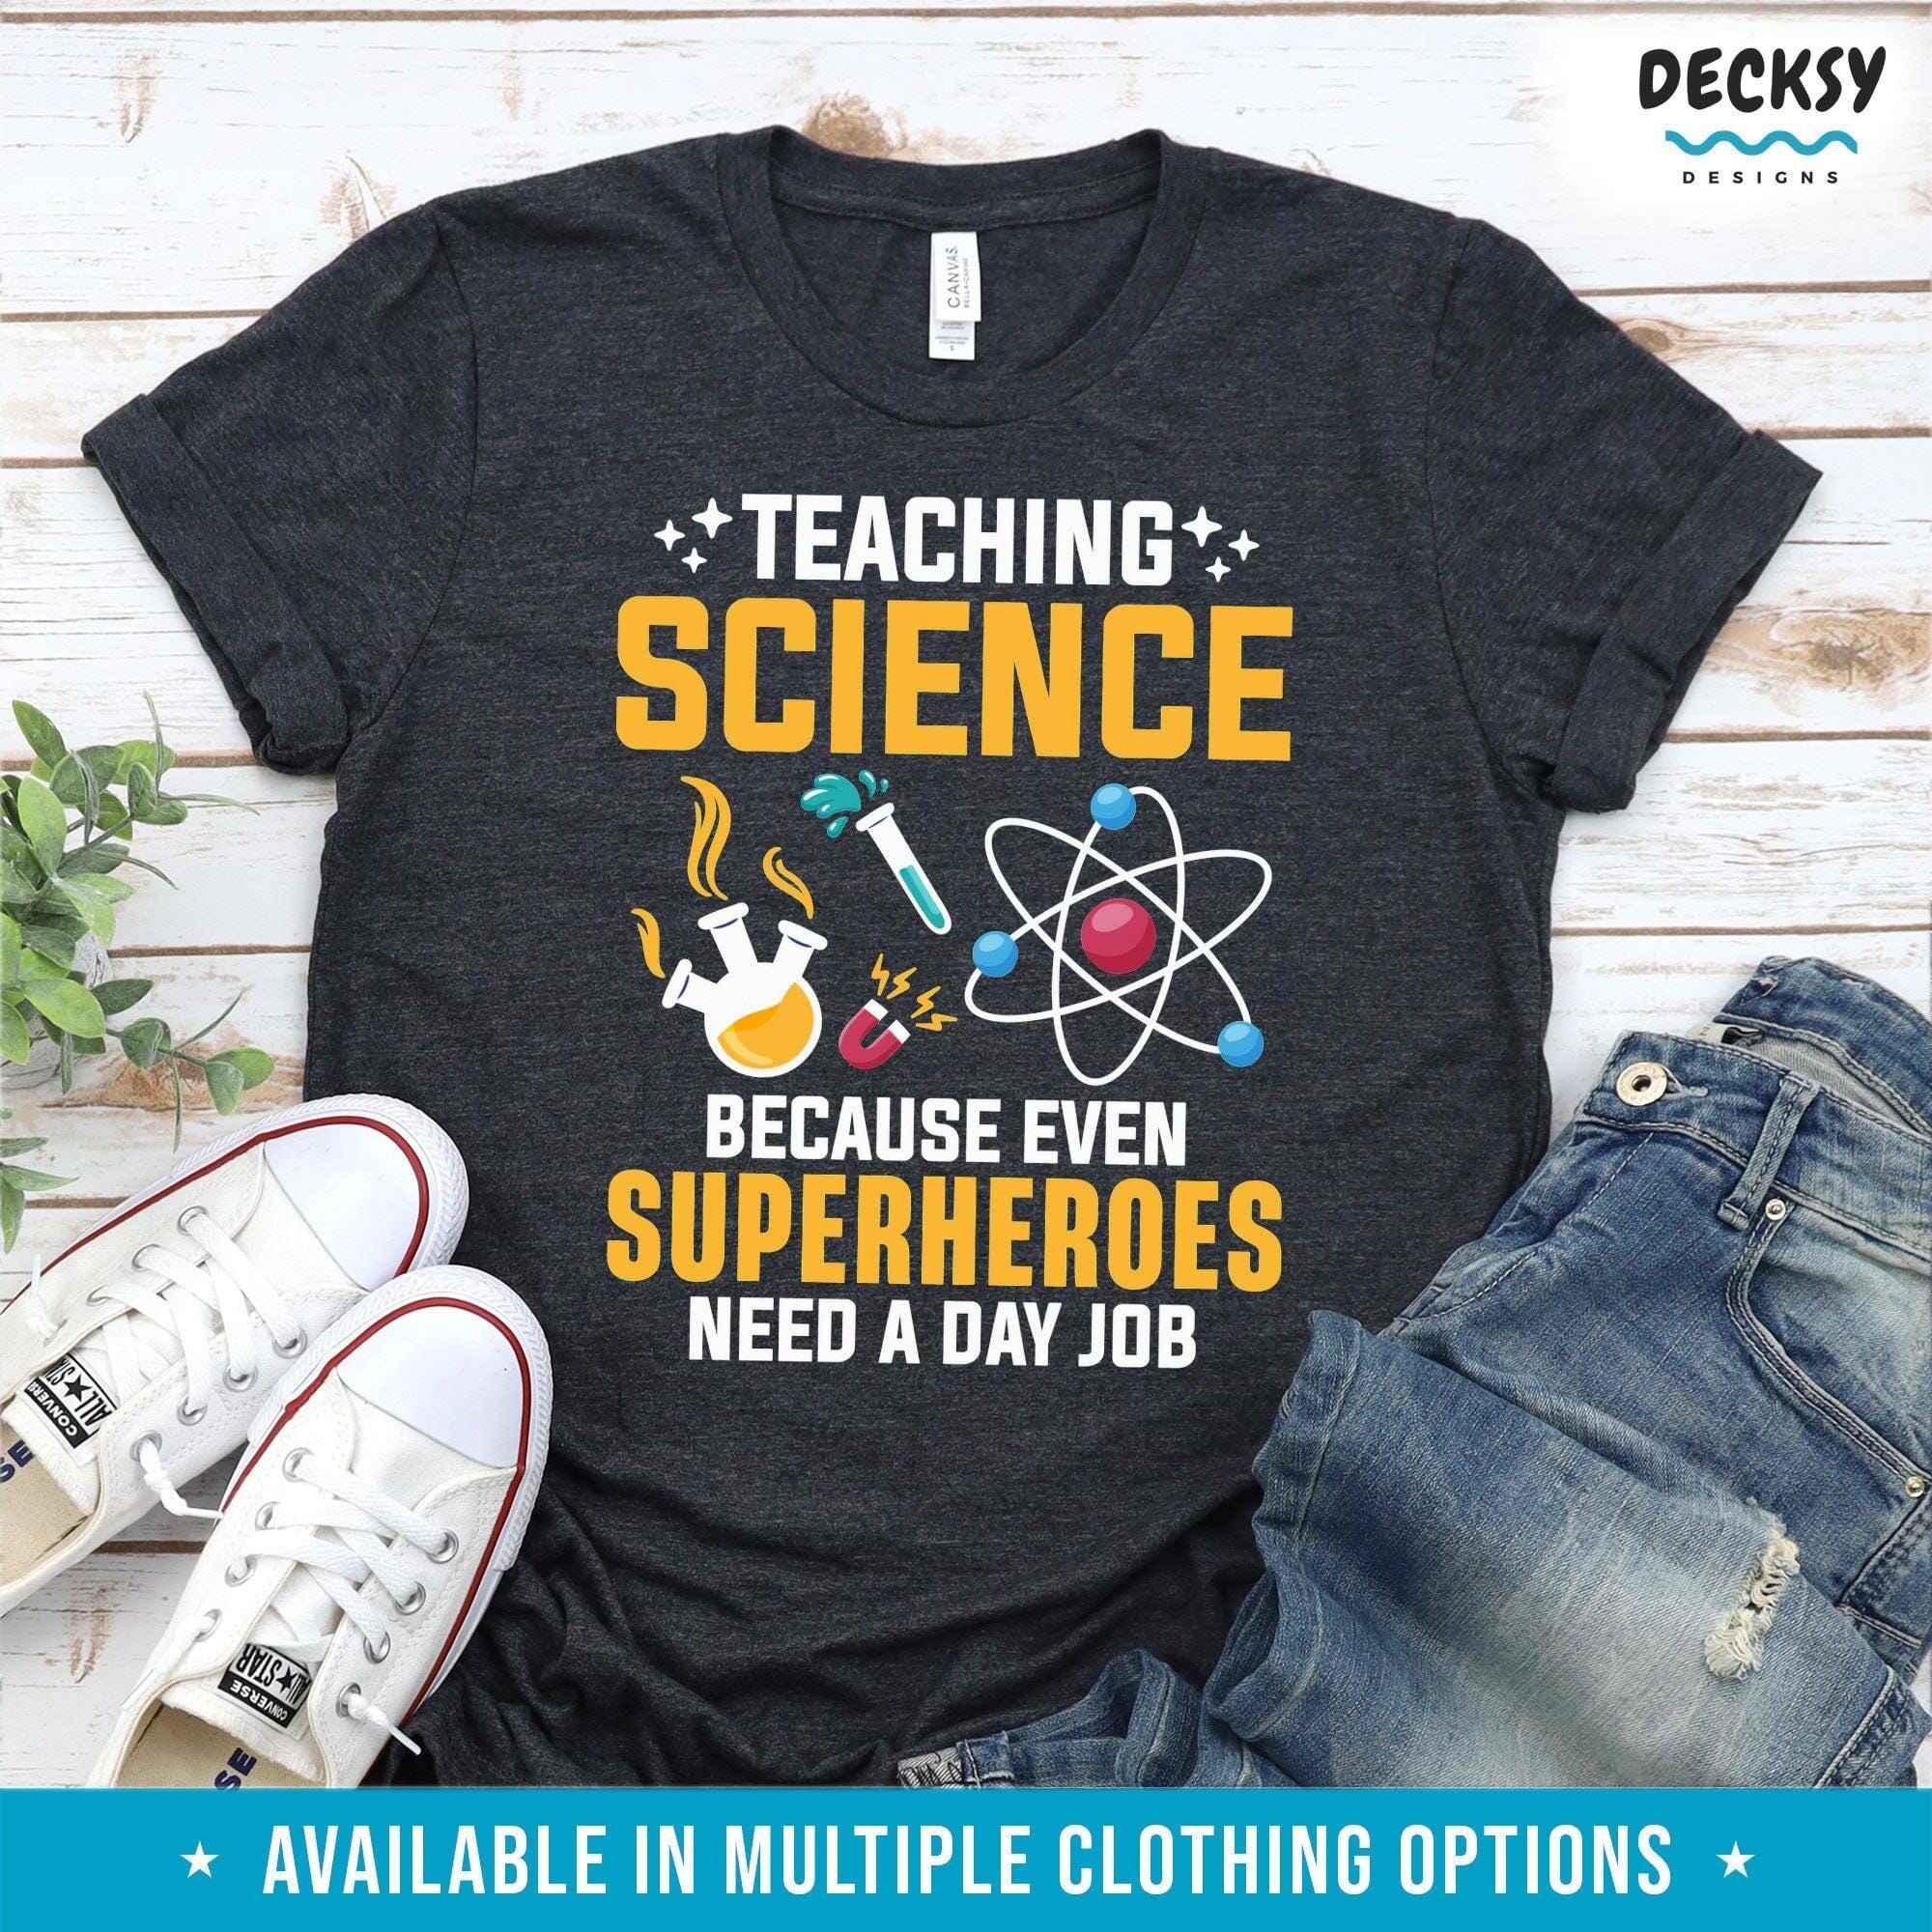 Science Teacher Shirt, School Teaching Gift-Clothing:Gender-Neutral Adult Clothing:Tops & Tees:T-shirts:Graphic Tees-DecksyDesigns